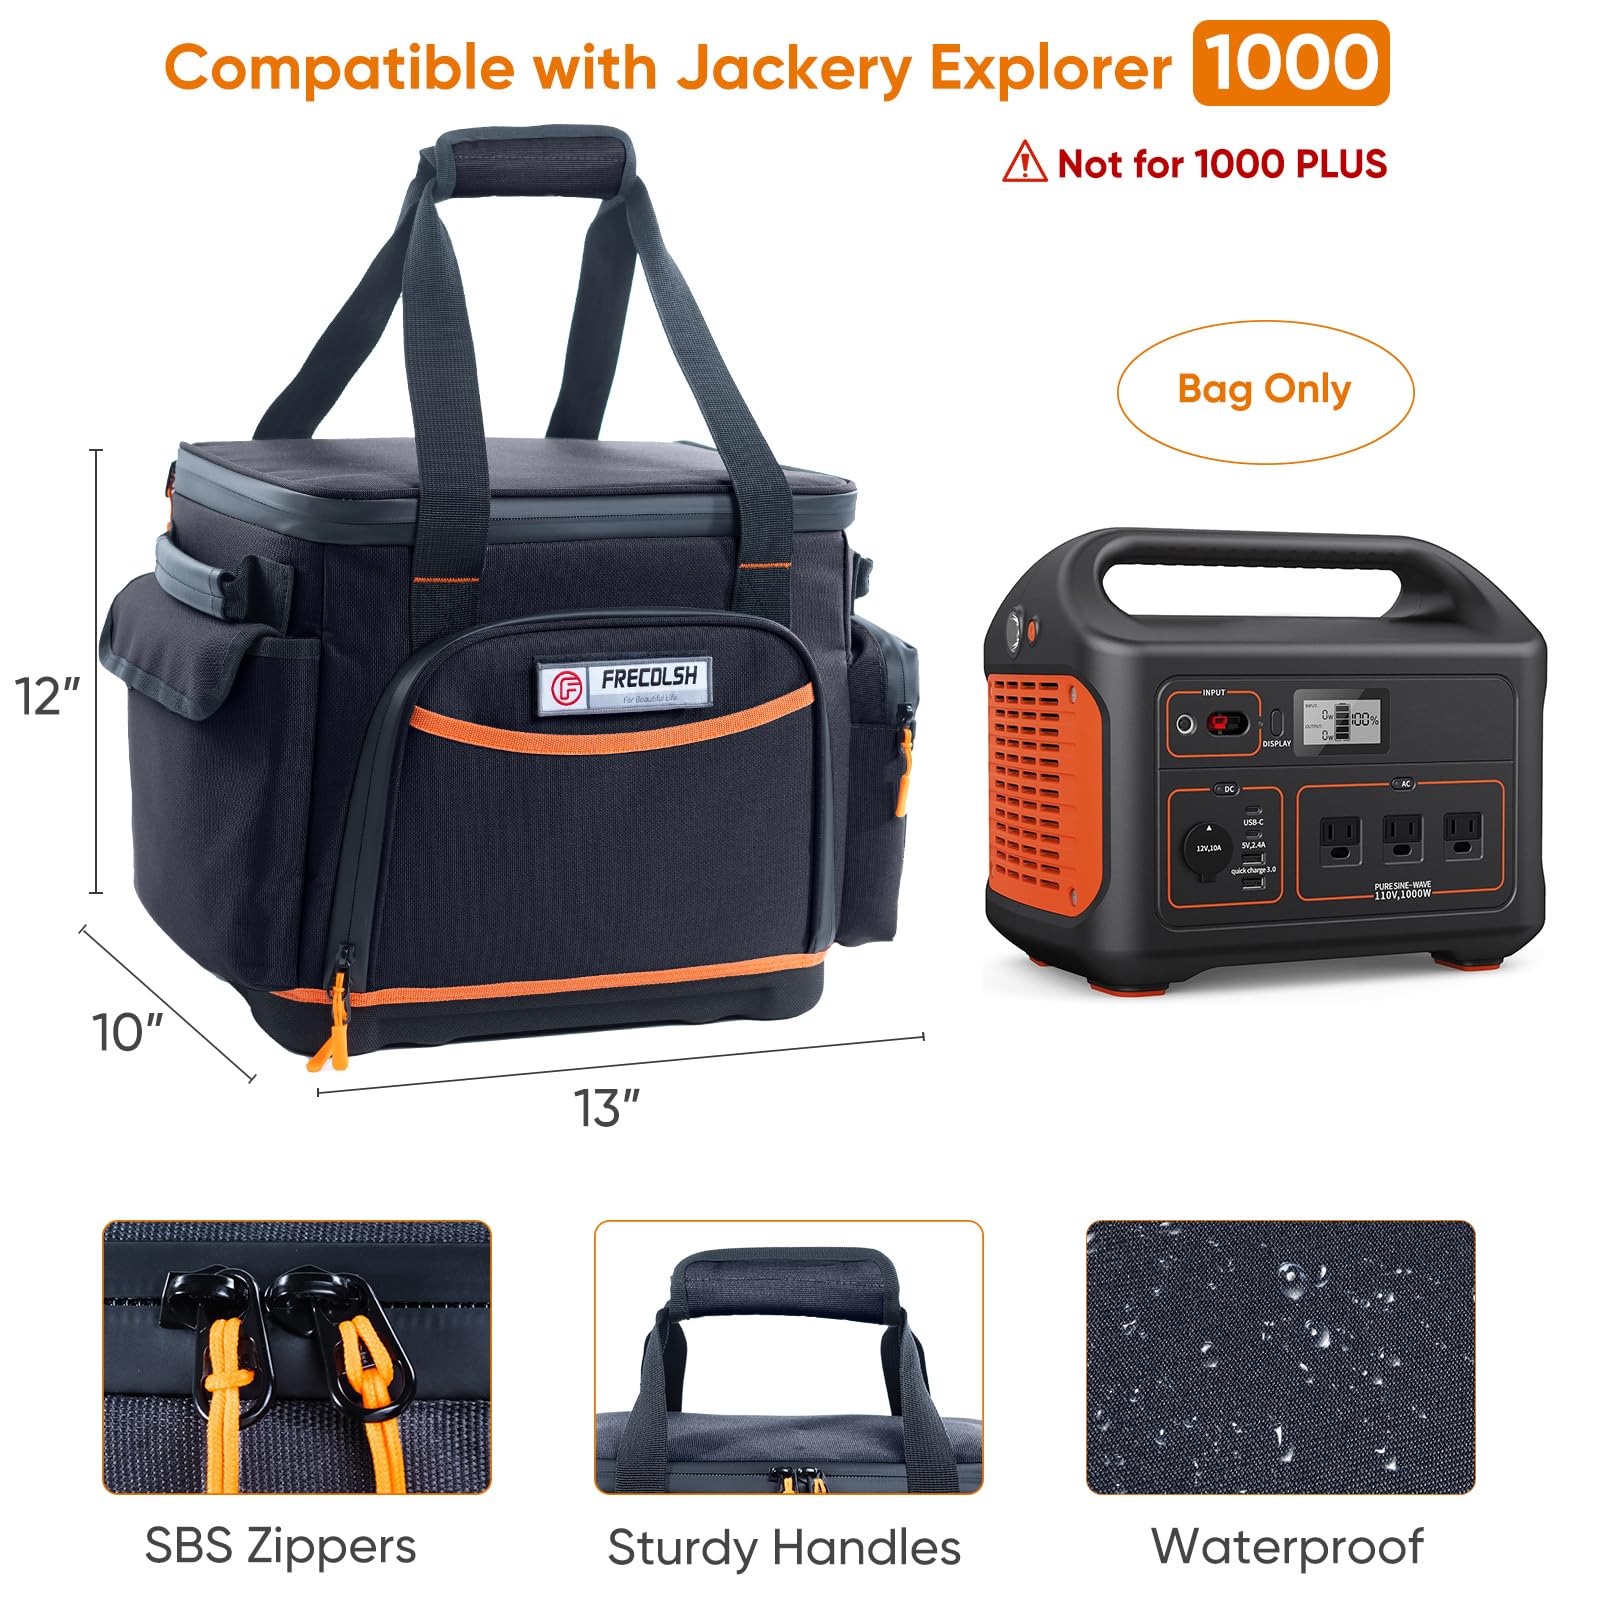 FRECOLSH Travel Carrying Case Compatible with Jackery Explorer 1000, Portable Power Station Storage Case with Waterproof Bottom and Pocket for Jackery Accessories Solar Generator Storage Bag Only